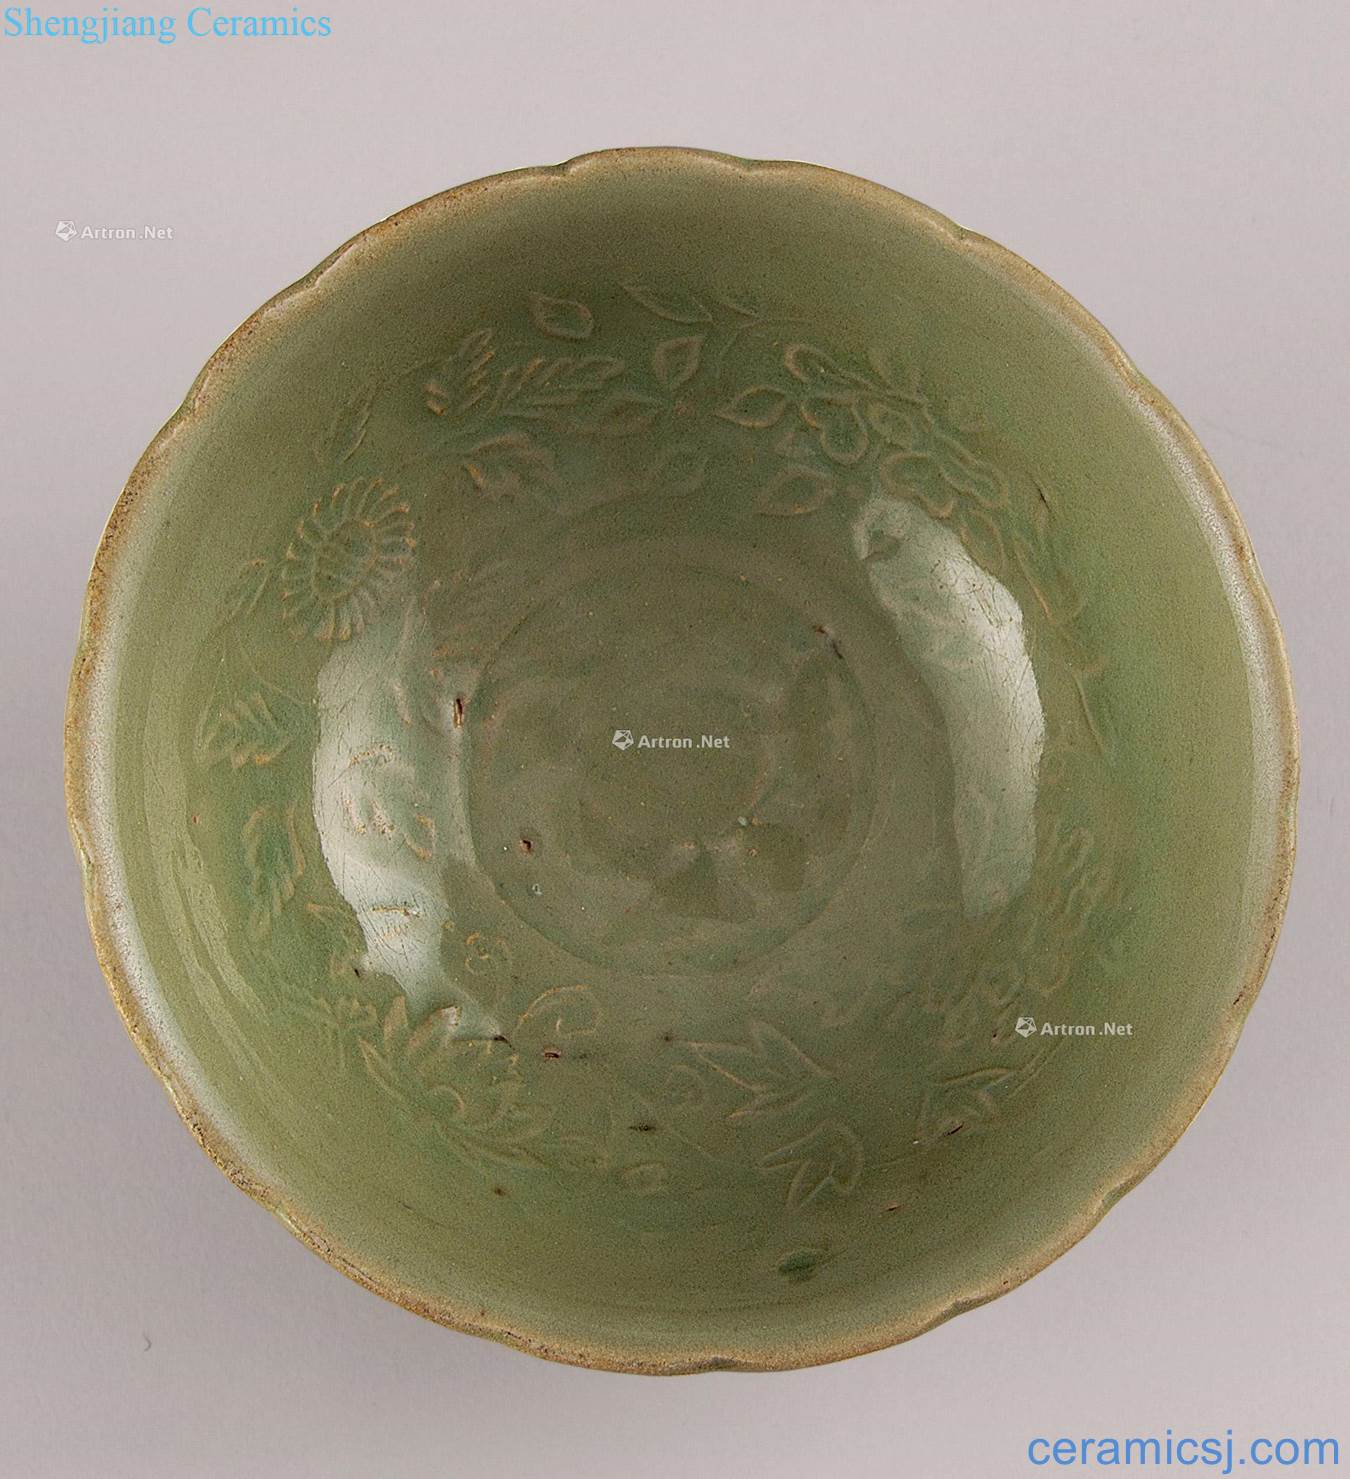 The southern song dynasty Printed longquan celadon bowls